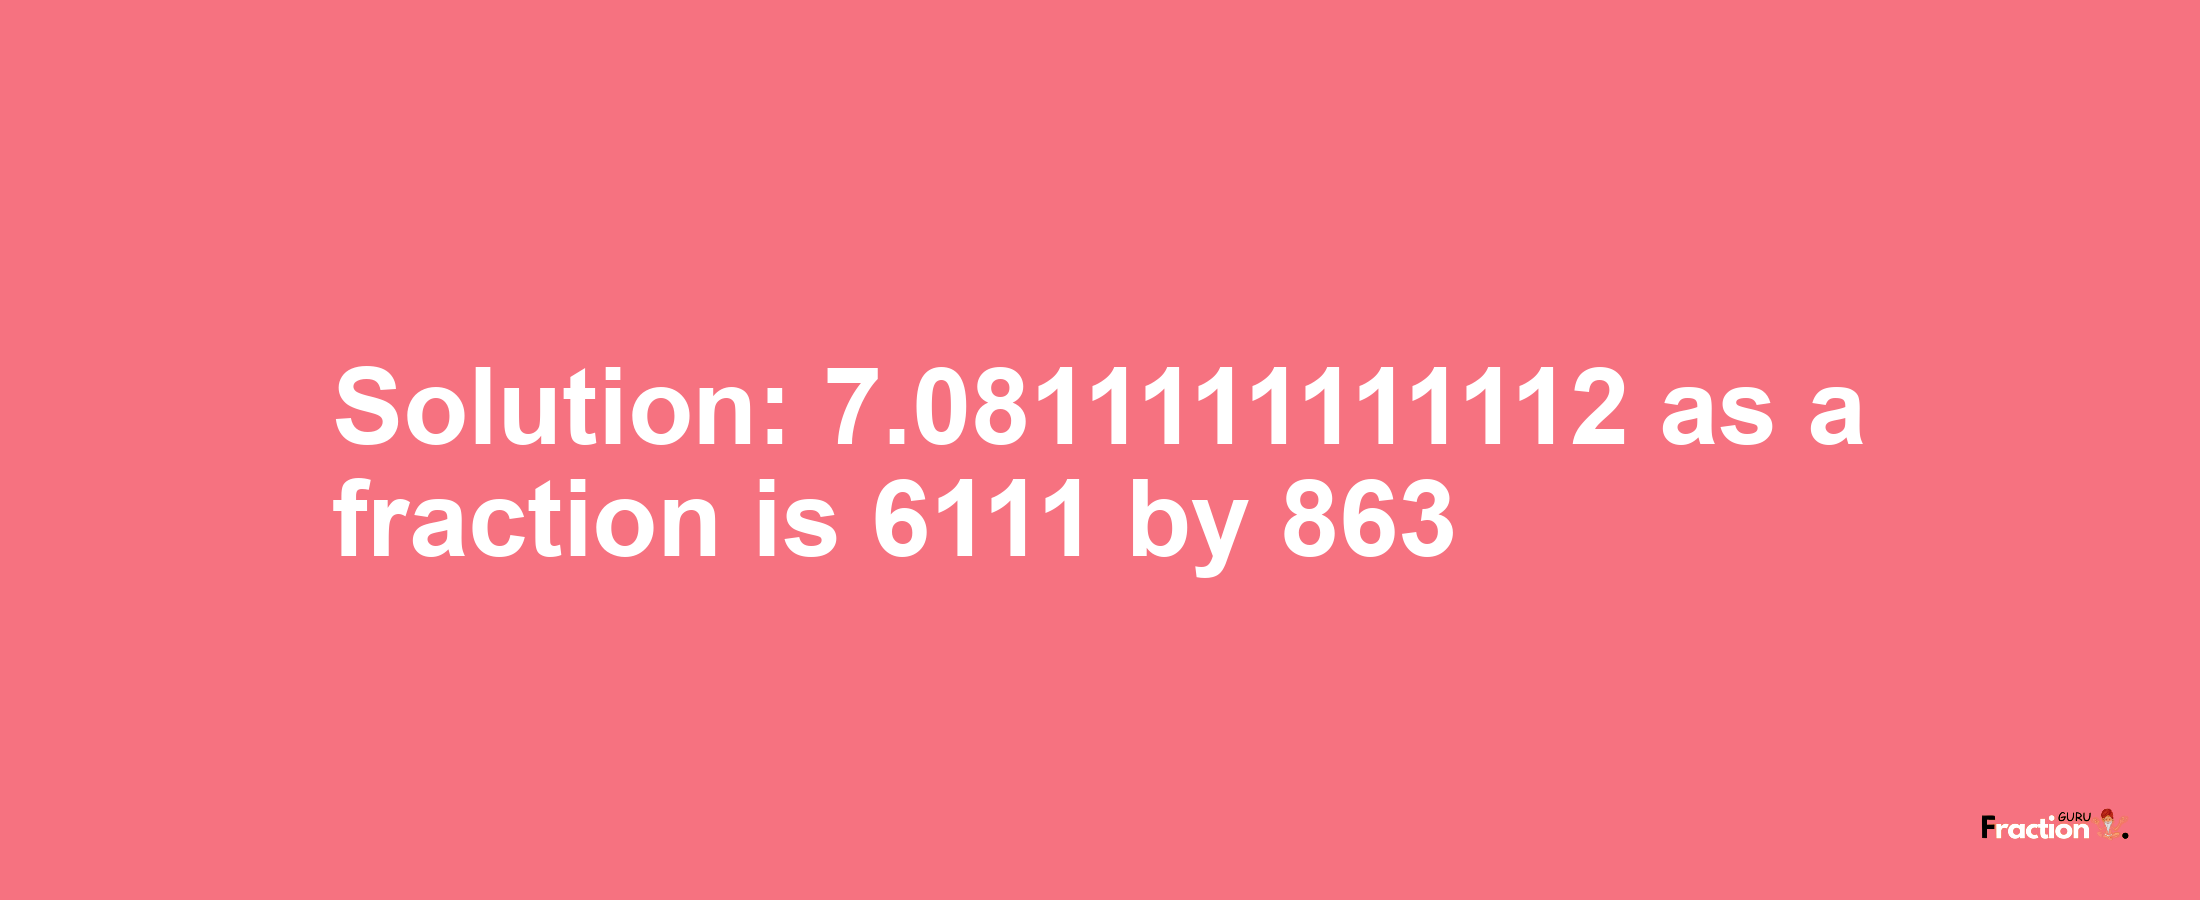 Solution:7.0811111111112 as a fraction is 6111/863